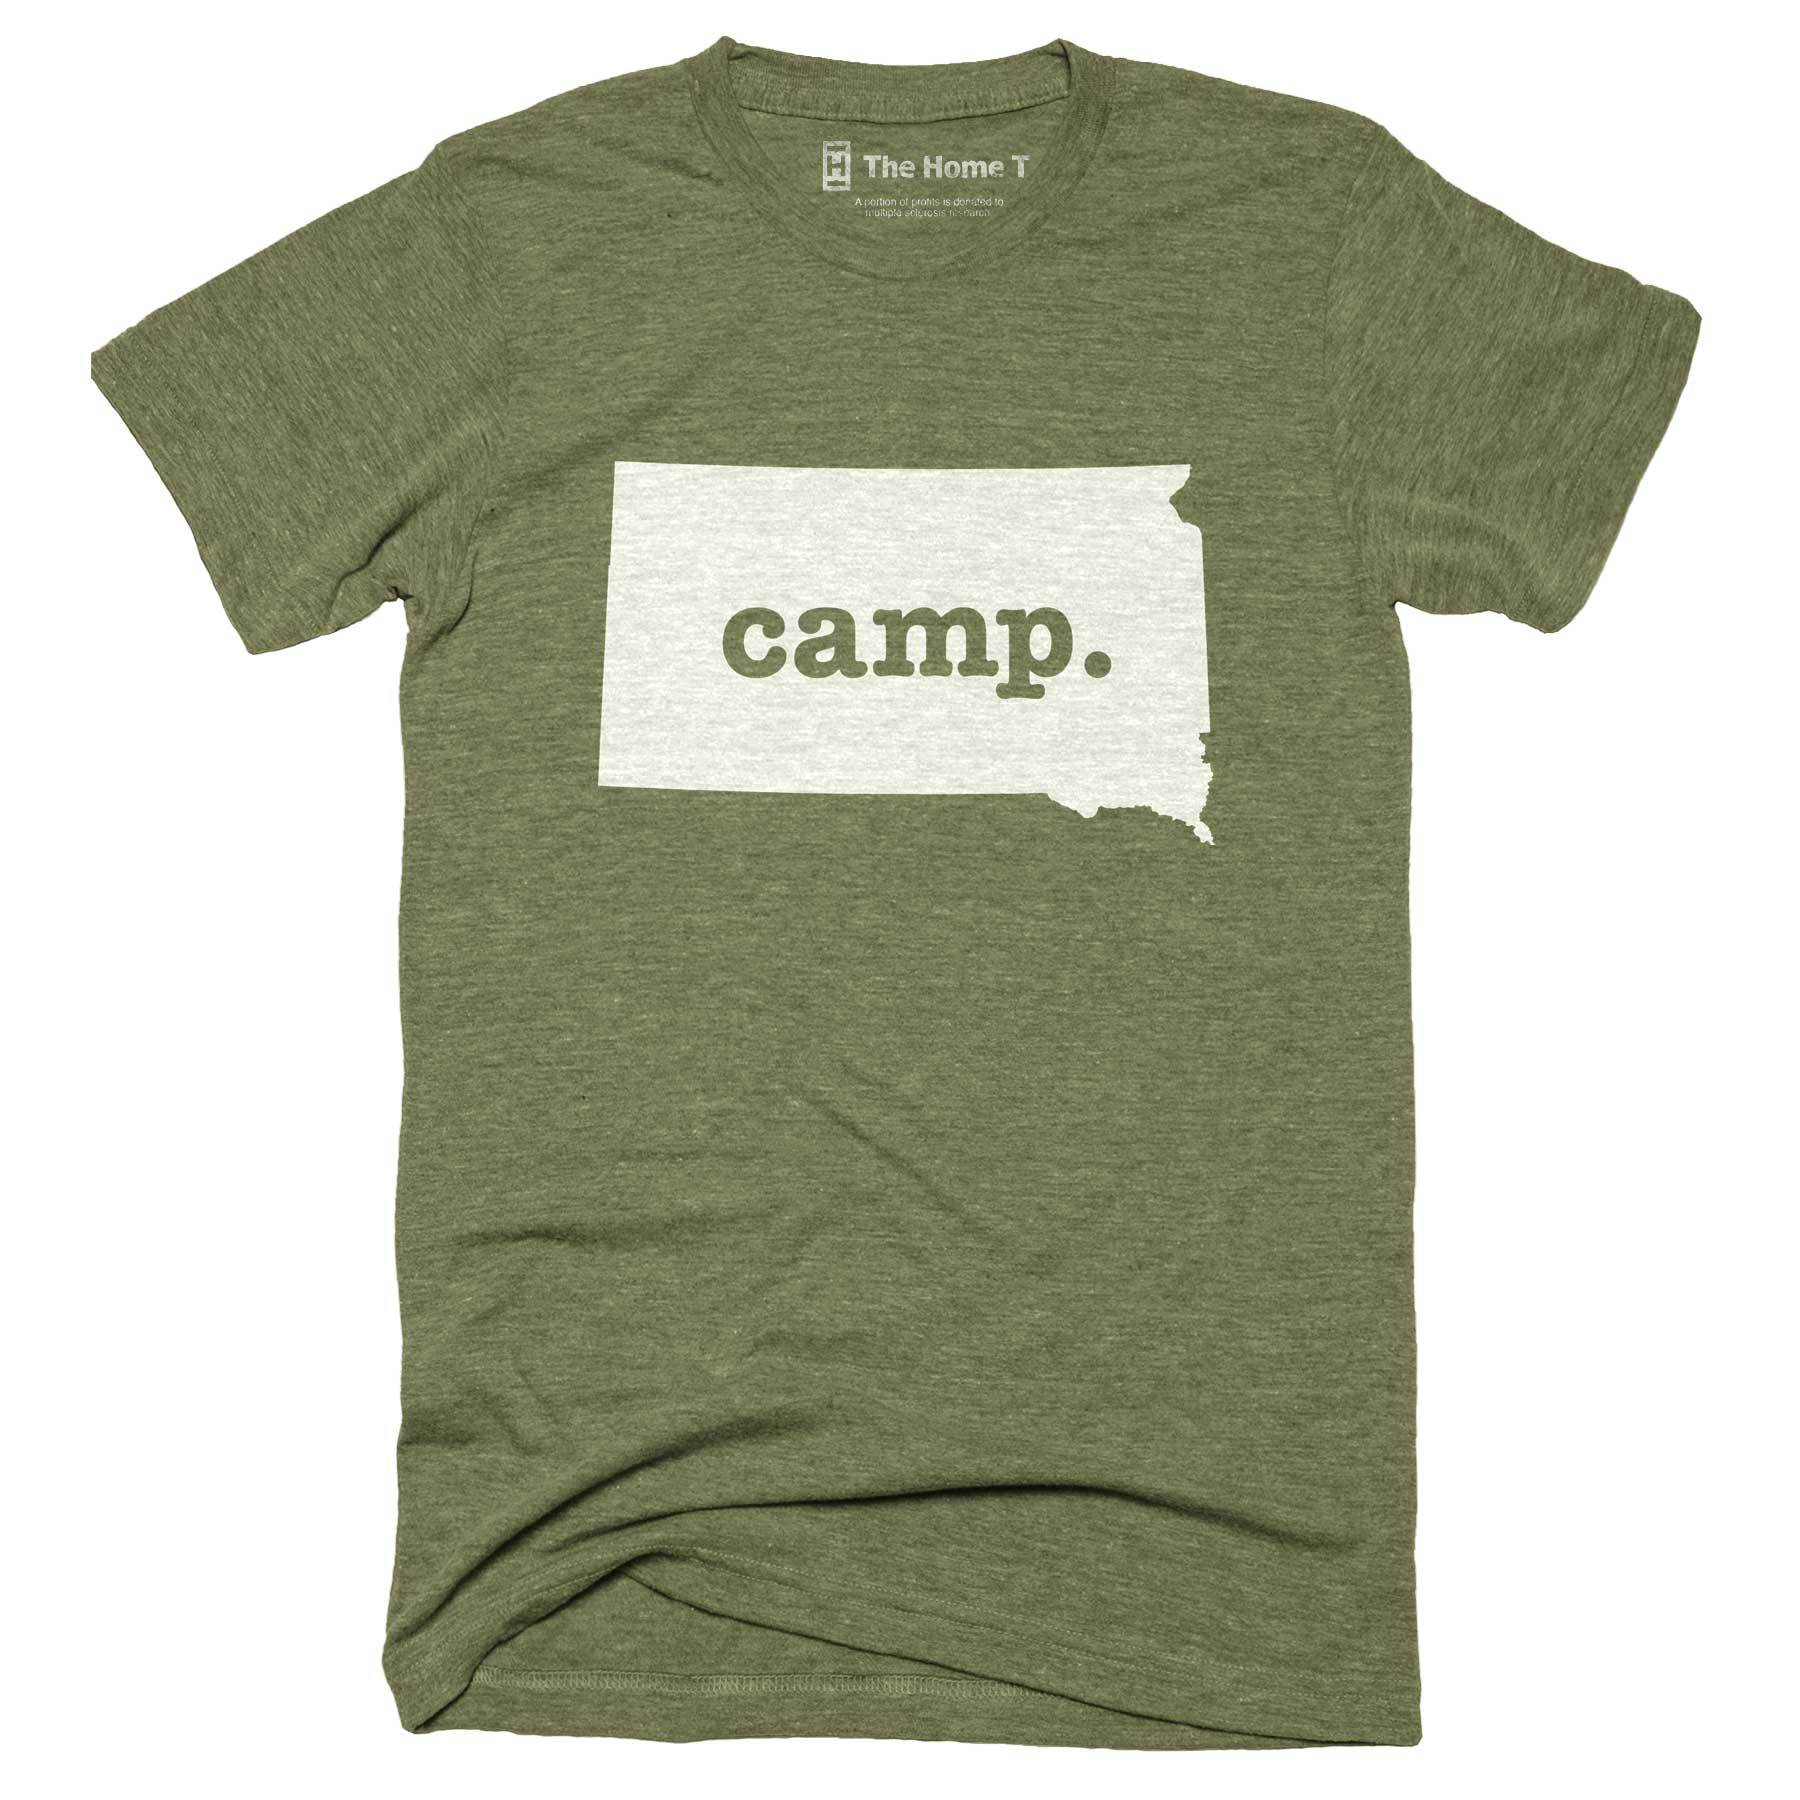 South Dakota Camp Home T-Shirt Outdoor Collection The Home T XXL Army Green